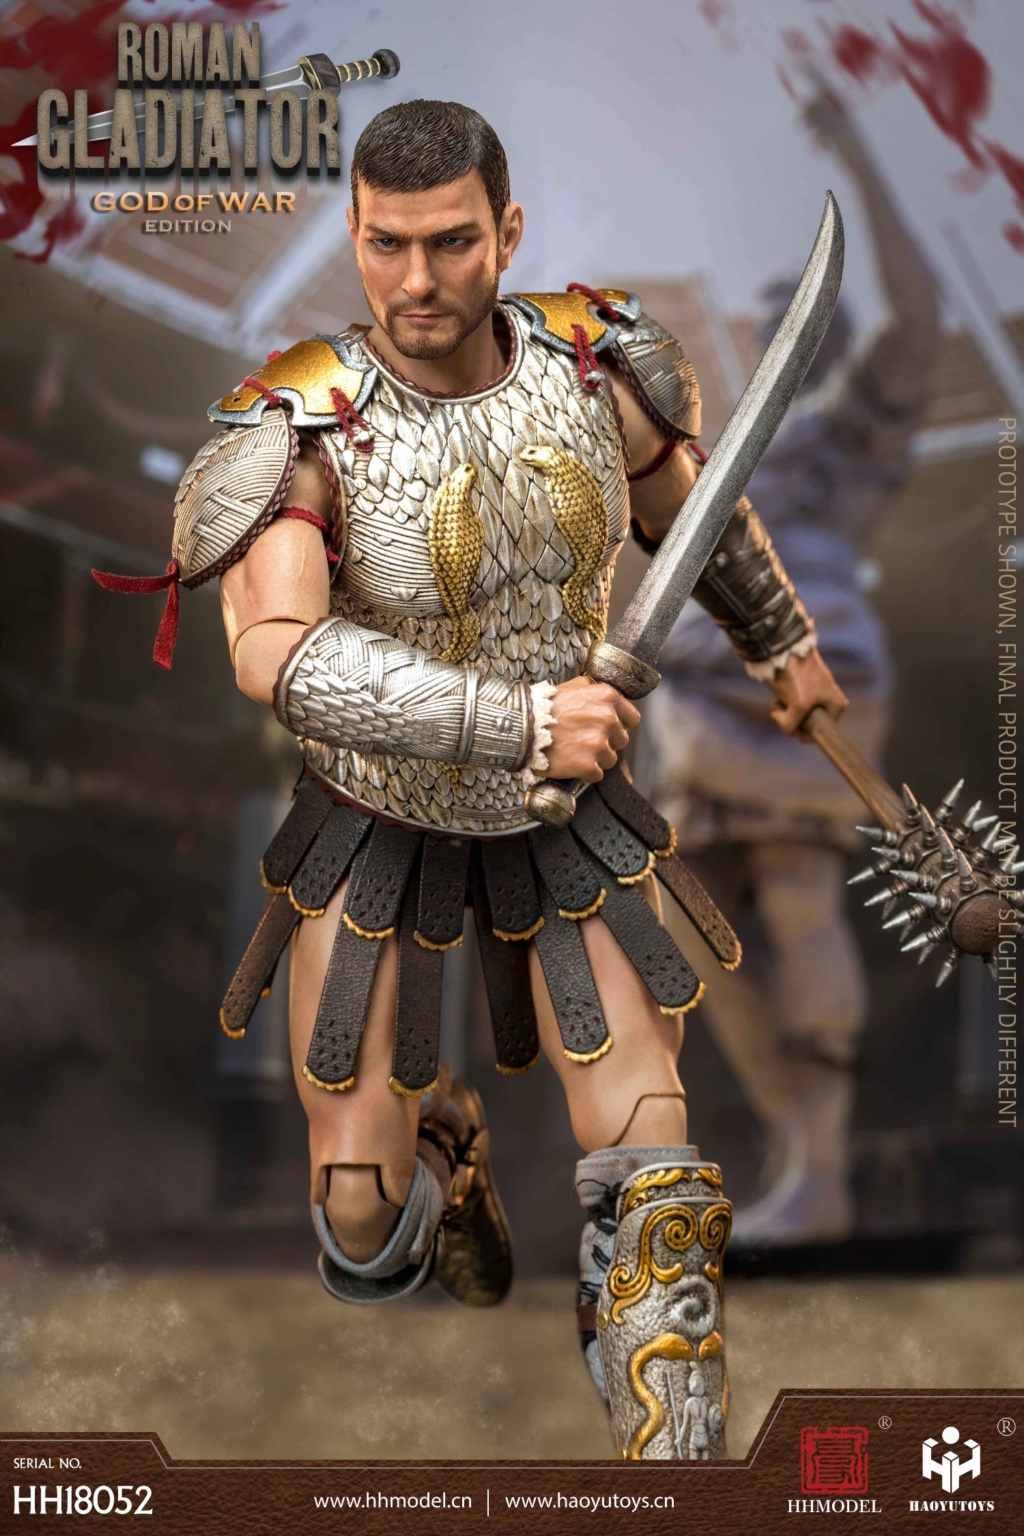 Historical - NEW PRODUCT: HHMODEL & HAOYUTOYS: 1/6 Imperial Legion Series - Roman Gladiator [God of War Edition] HH18052 & [Hunt Edition] HH18053 20384511